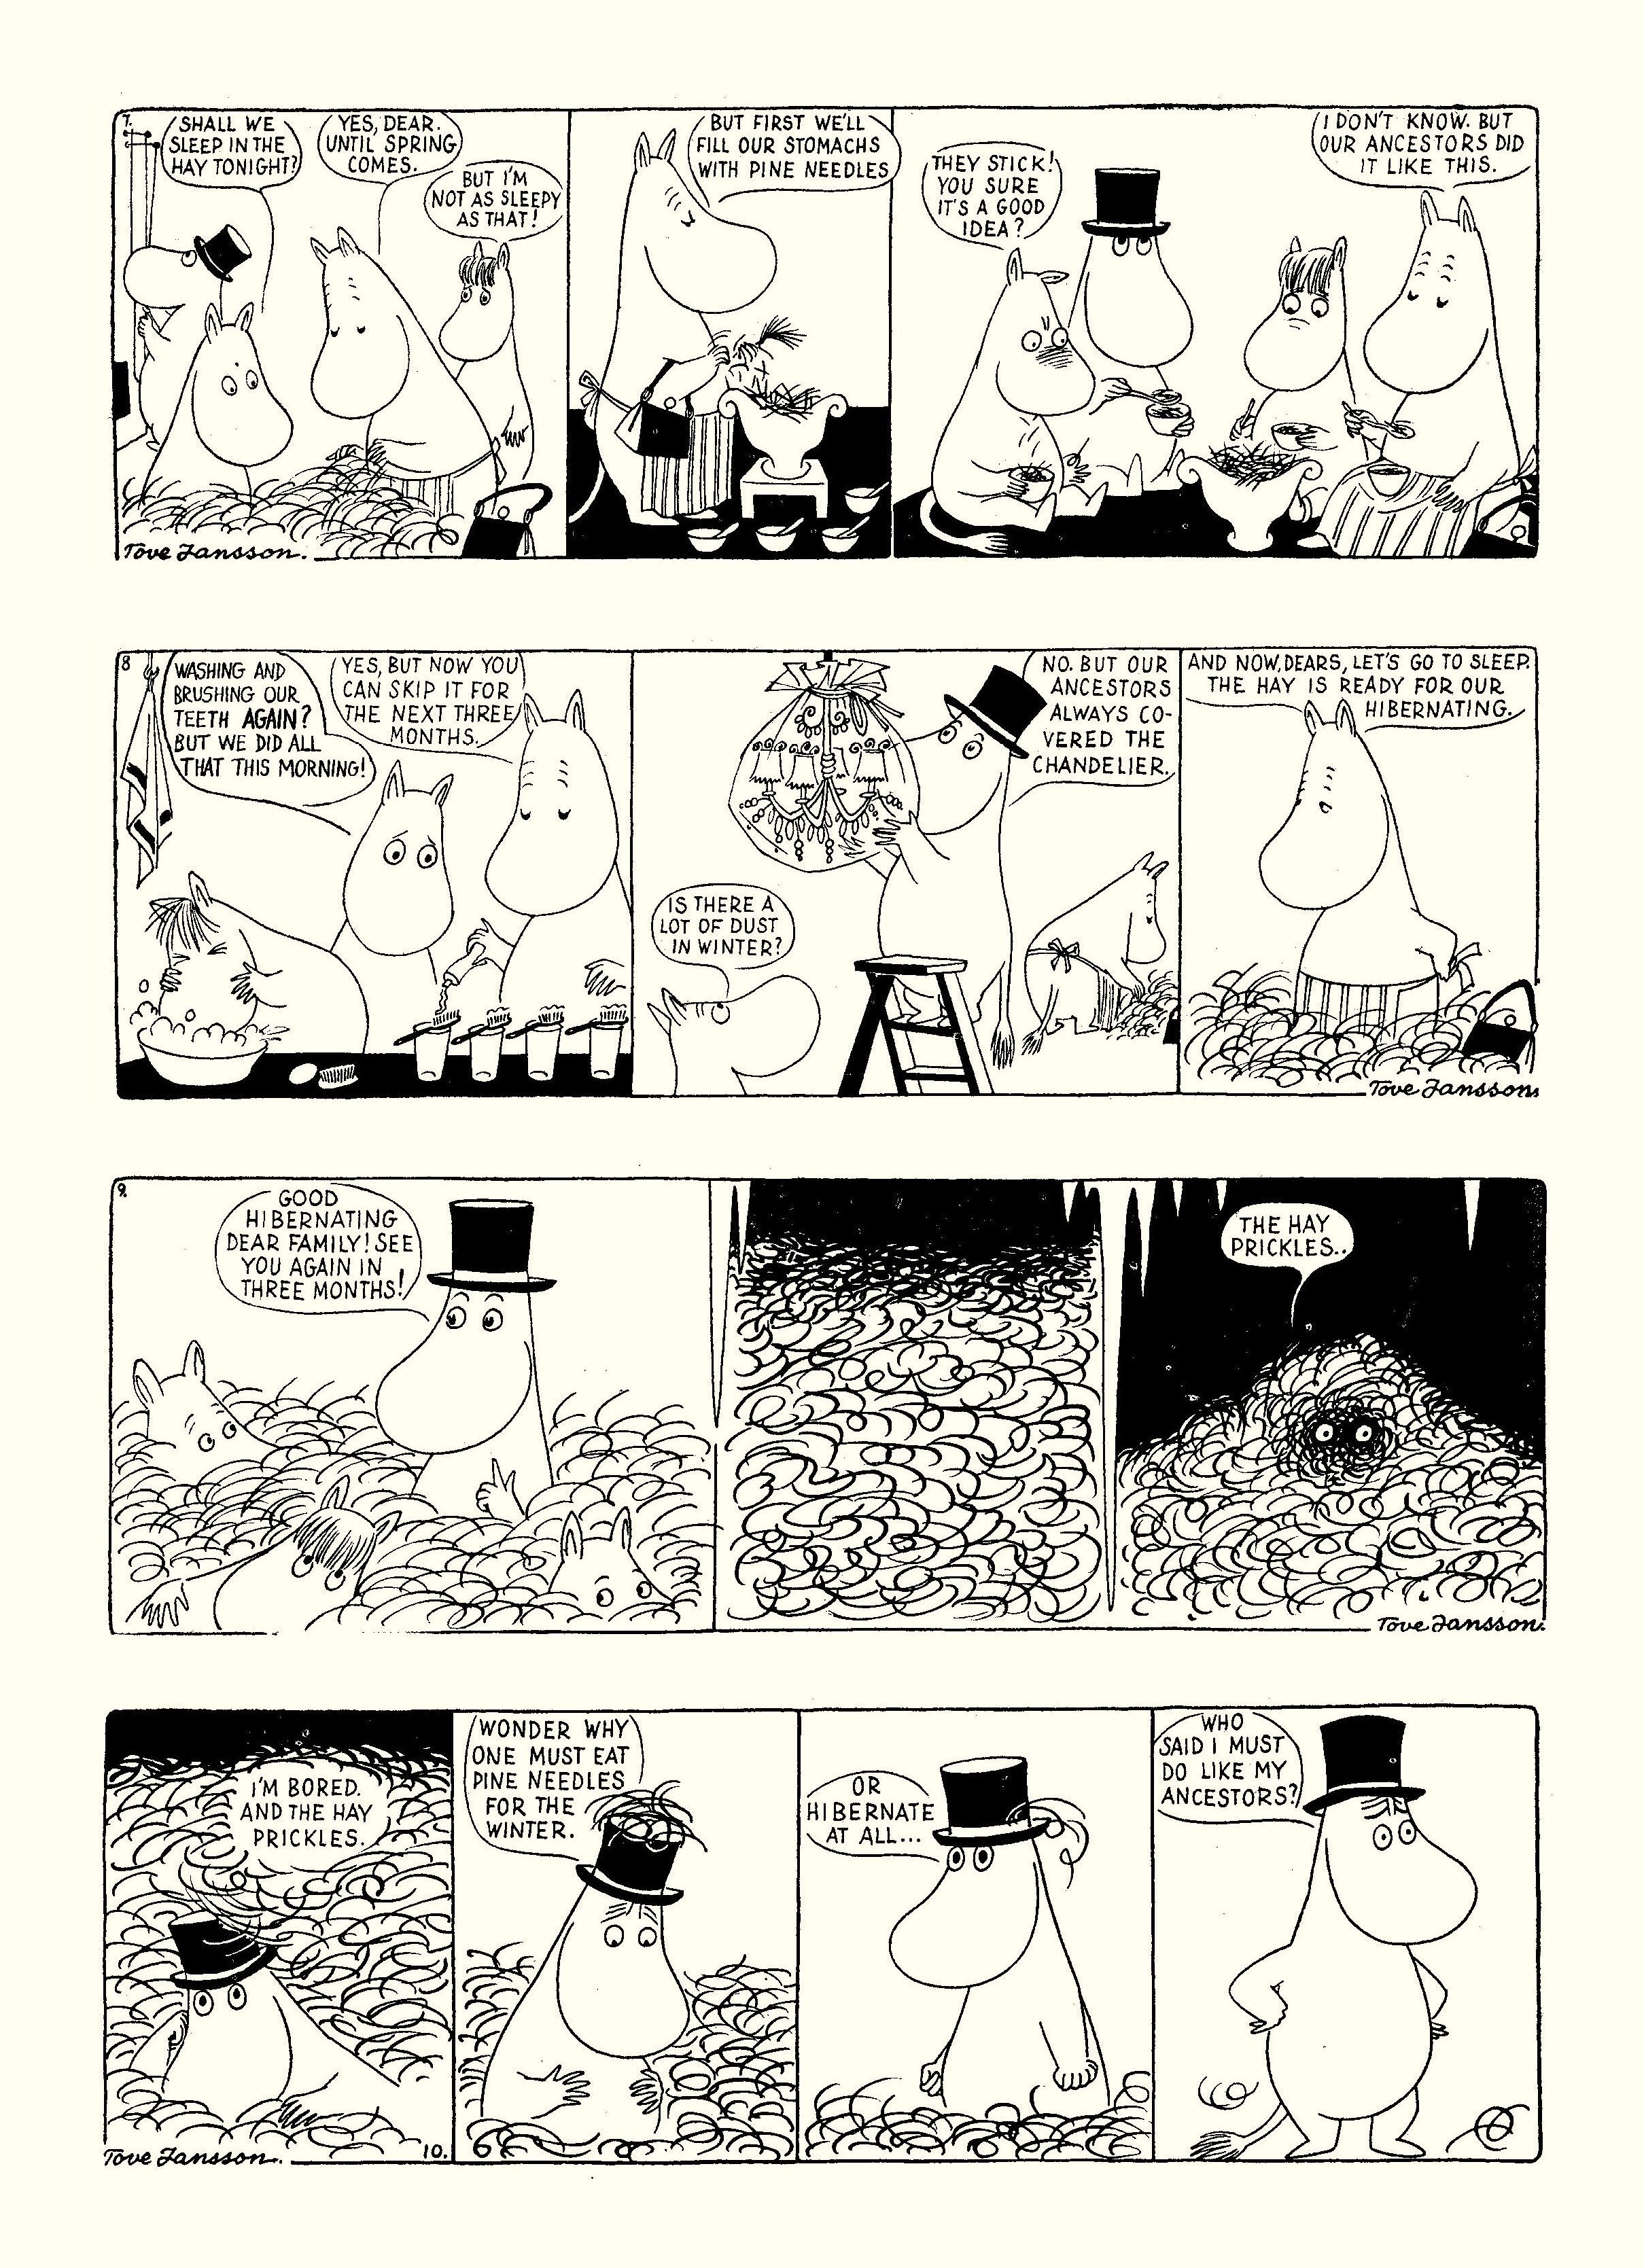 Read online Moomin: The Complete Tove Jansson Comic Strip comic -  Issue # TPB 2 - 8